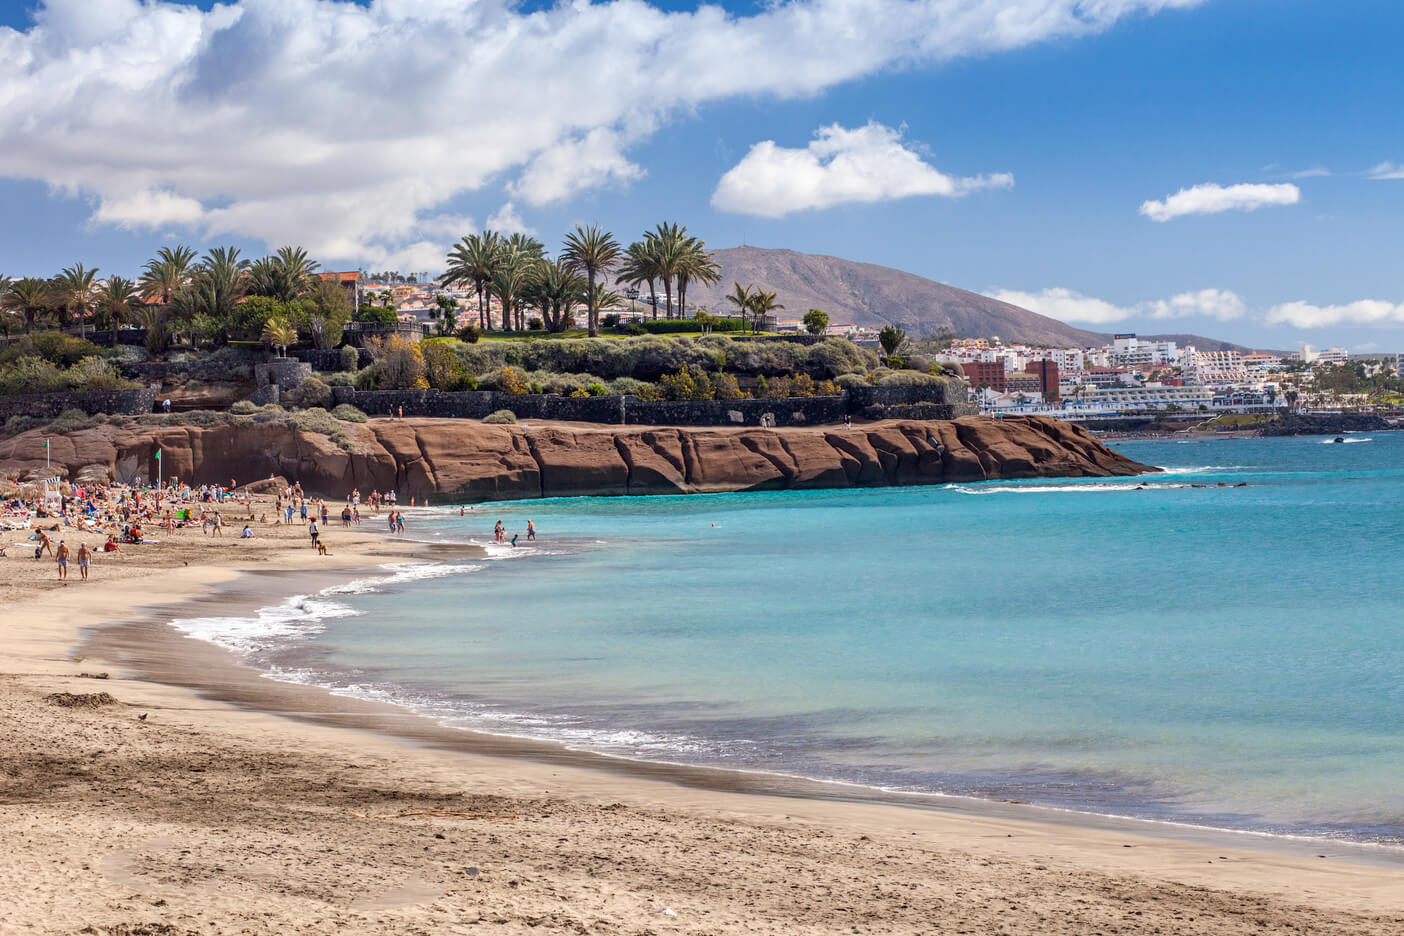 Water sports in Tenerife: White sand beach next to Royal Hideaway Corales Resort